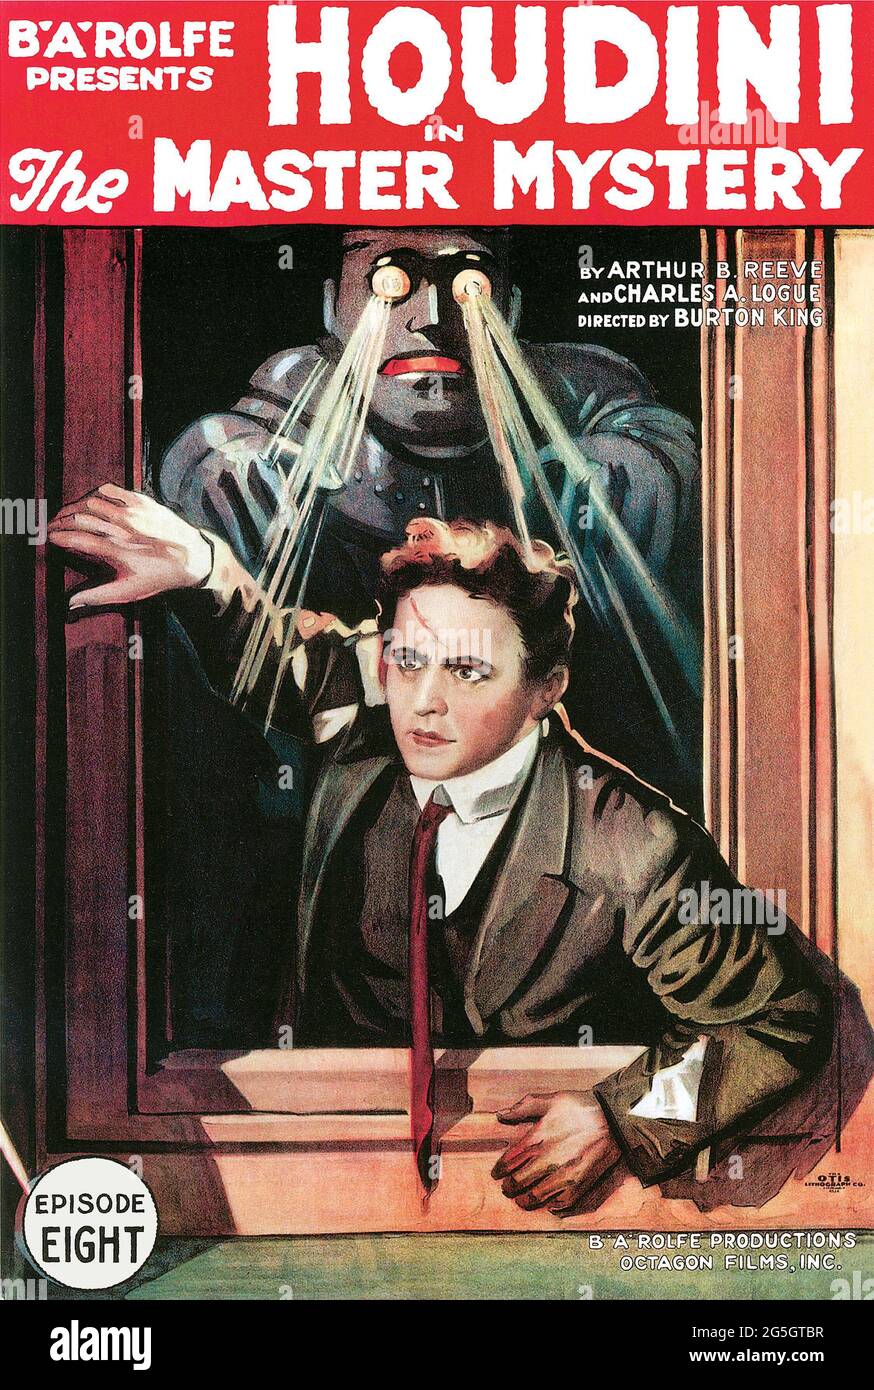 Harry Houdini, 1919 movie poster – The Master Mystery is a 1918-1919 American mystery silent serial film told in 15 installments. Stock Photo